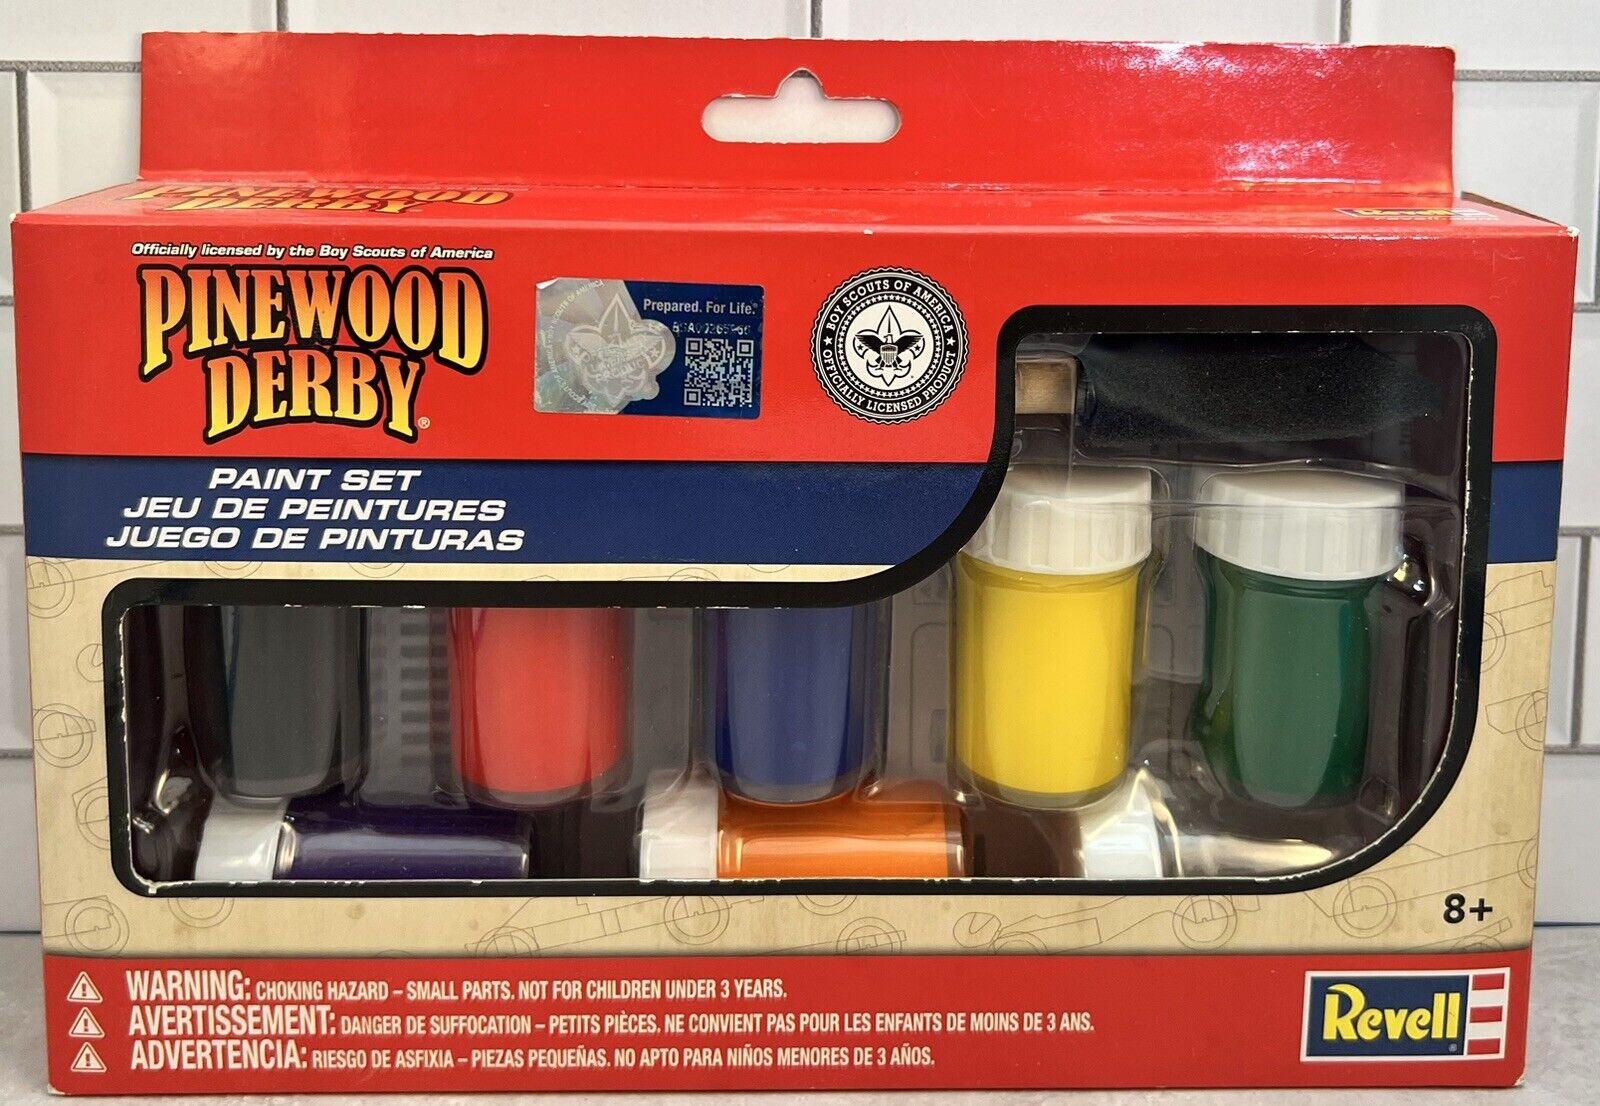 Boy Cub Scouts of America Pinewood Derby Revell Paint Set 8 Paints and Brushes